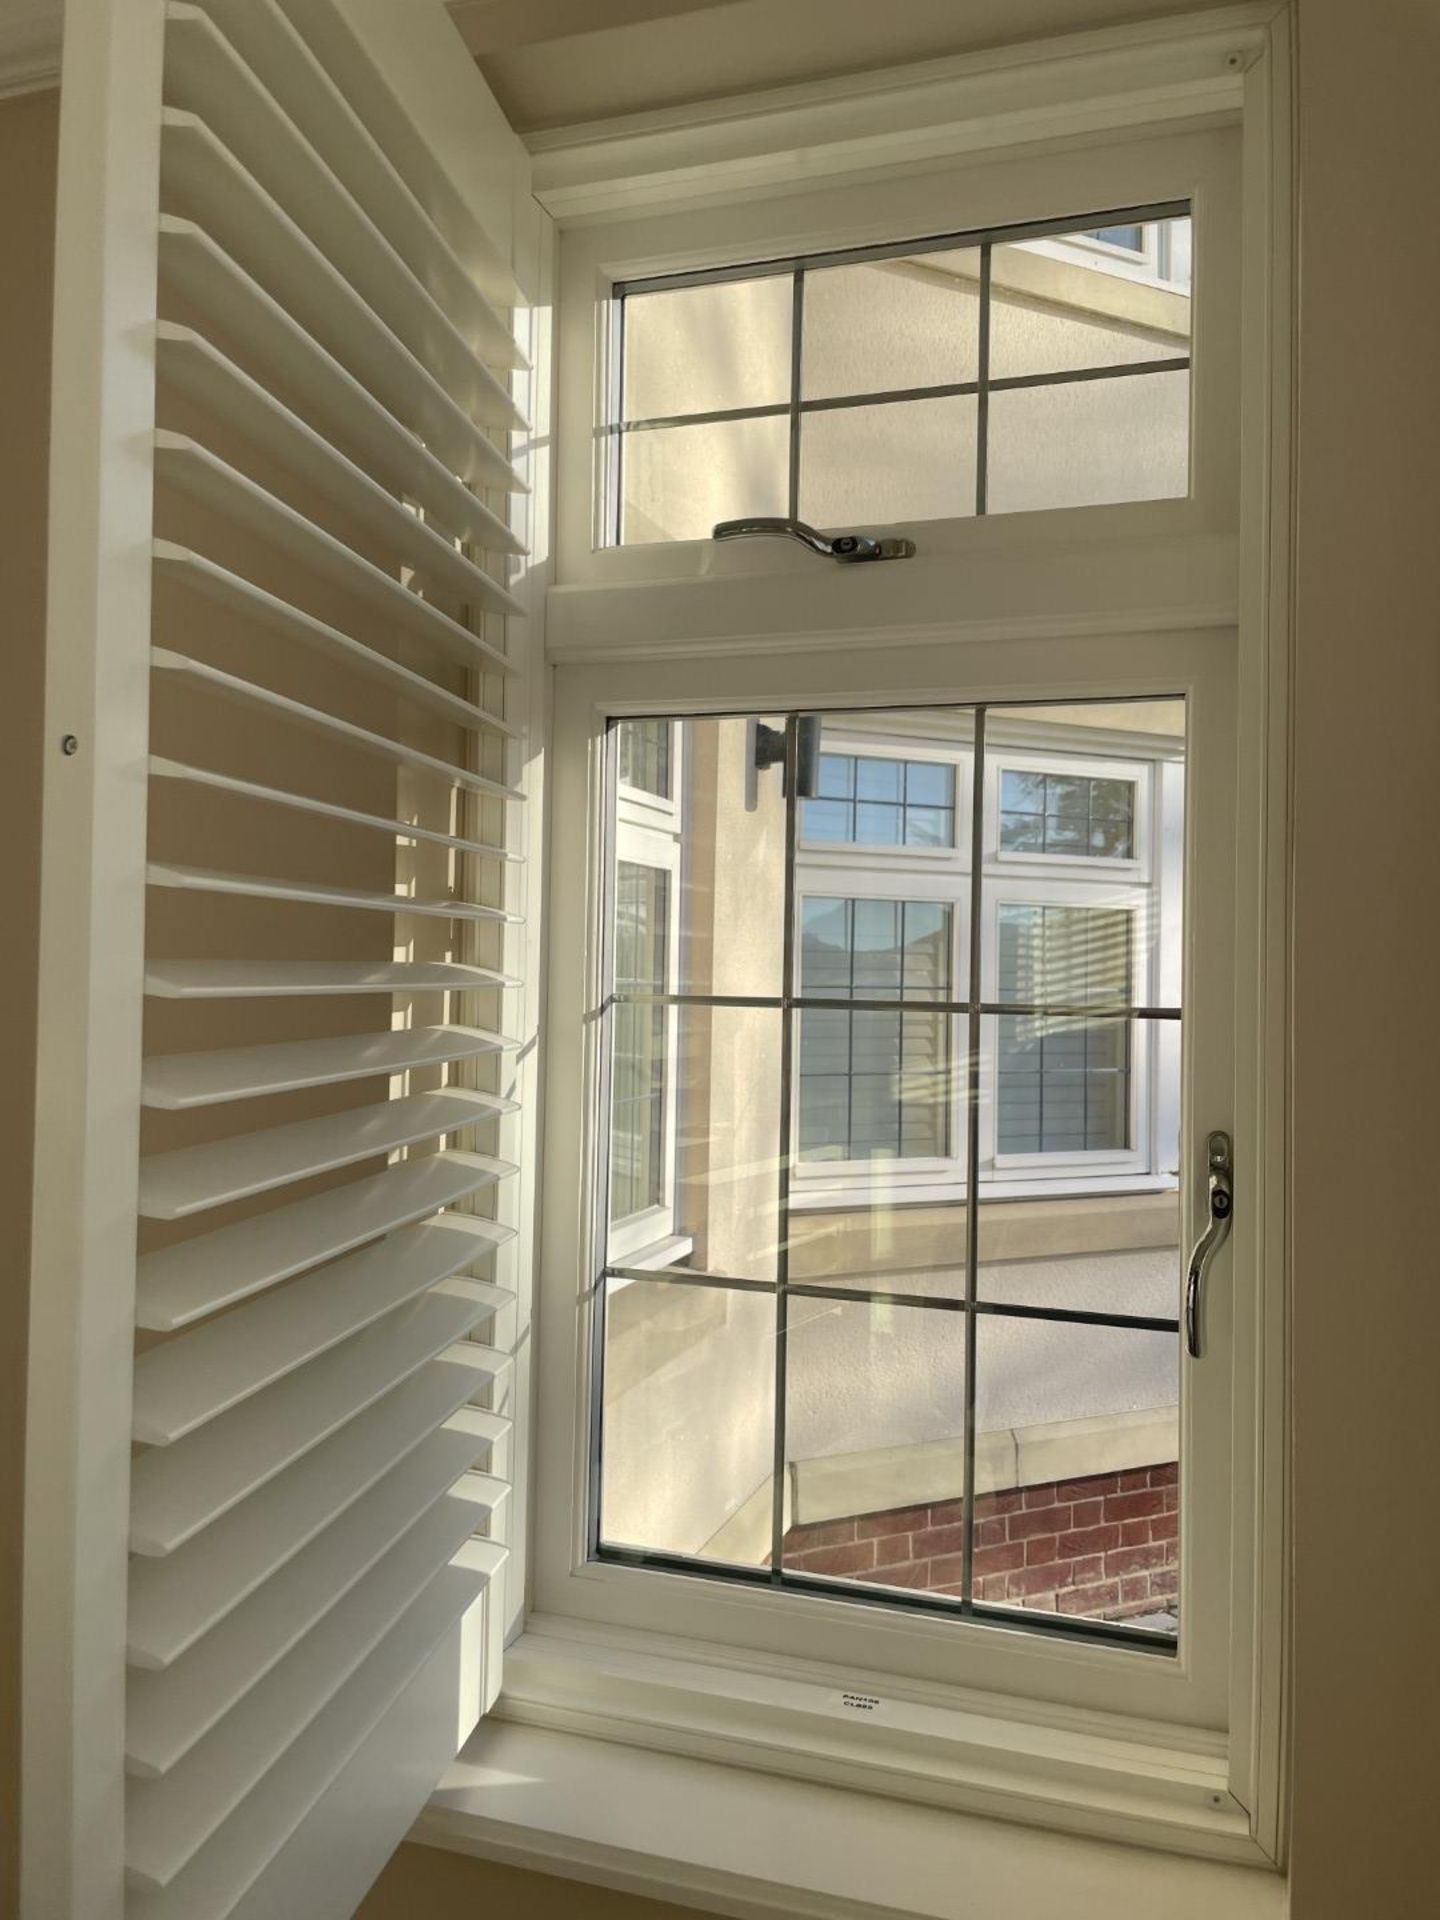 1 x Hardwood Timber Double Glazed Window Frames fitted with Shutter Blinds, In White - Ref: PAN106 - Image 11 of 23